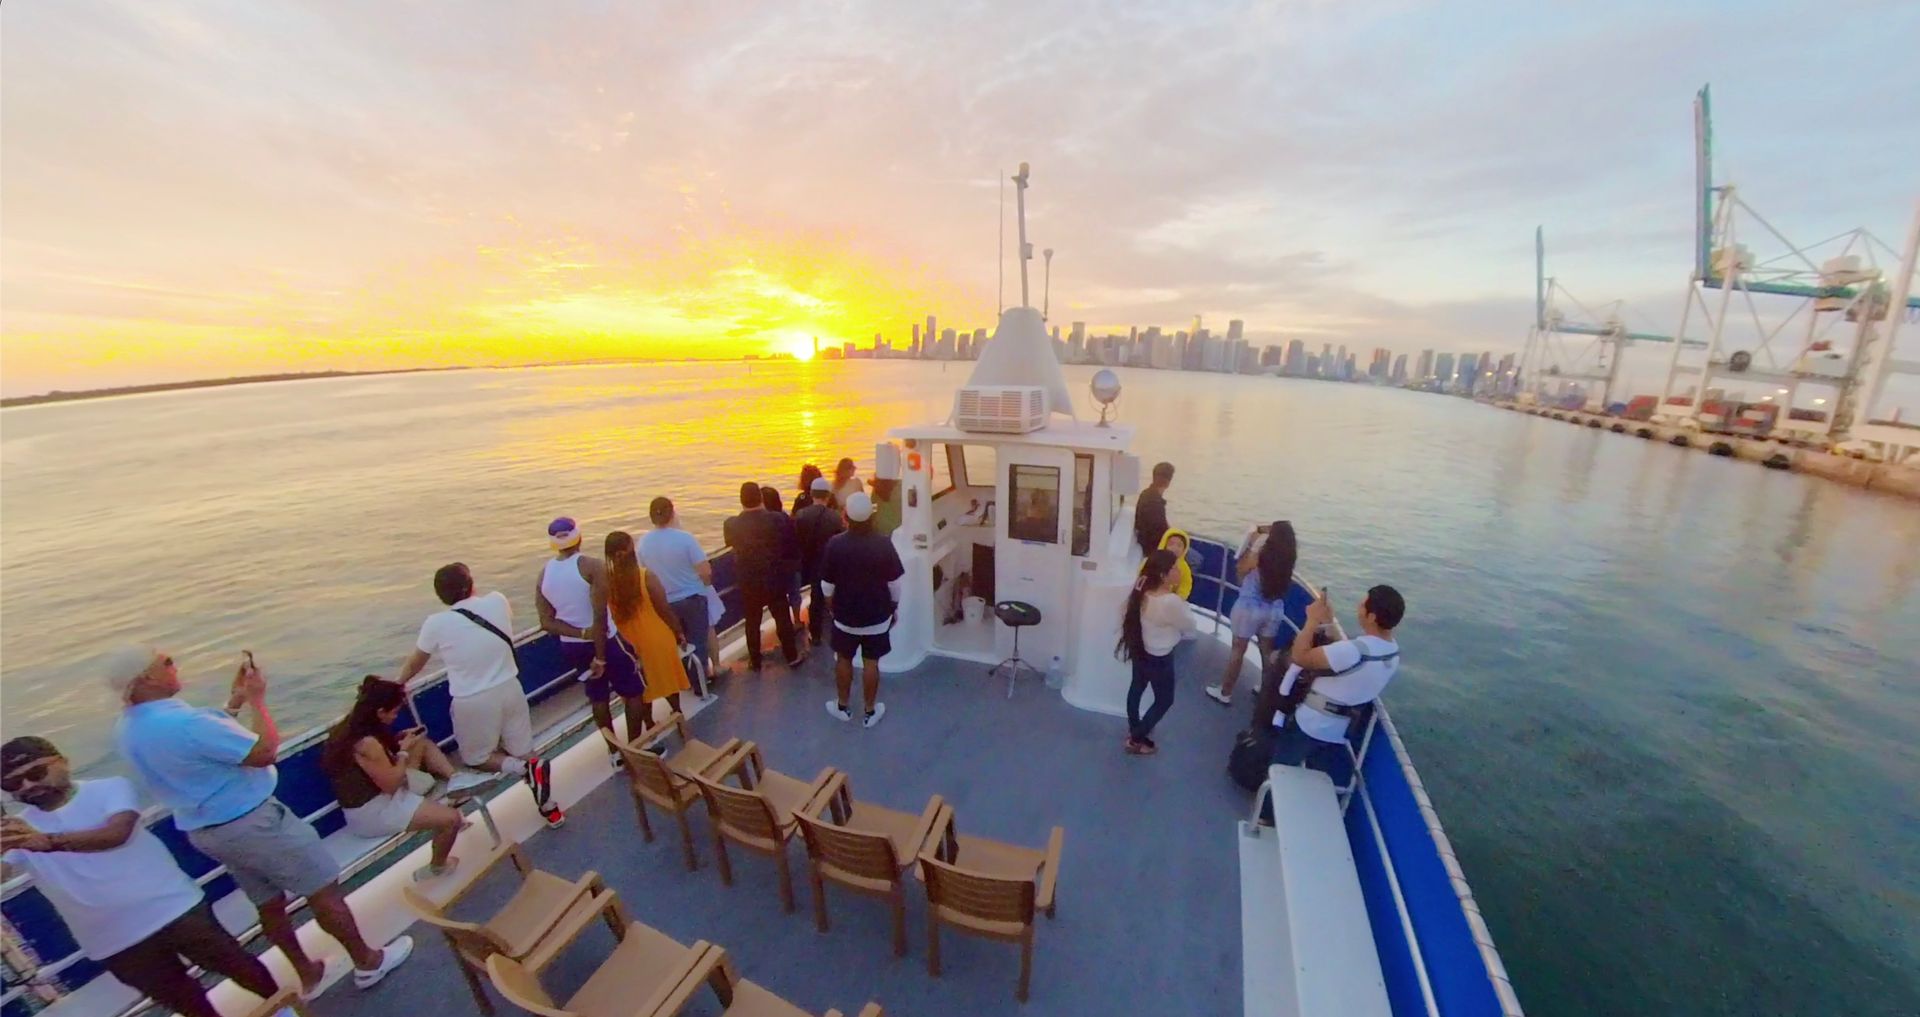 Miami Sunset Cruise on Biscayne Bay!